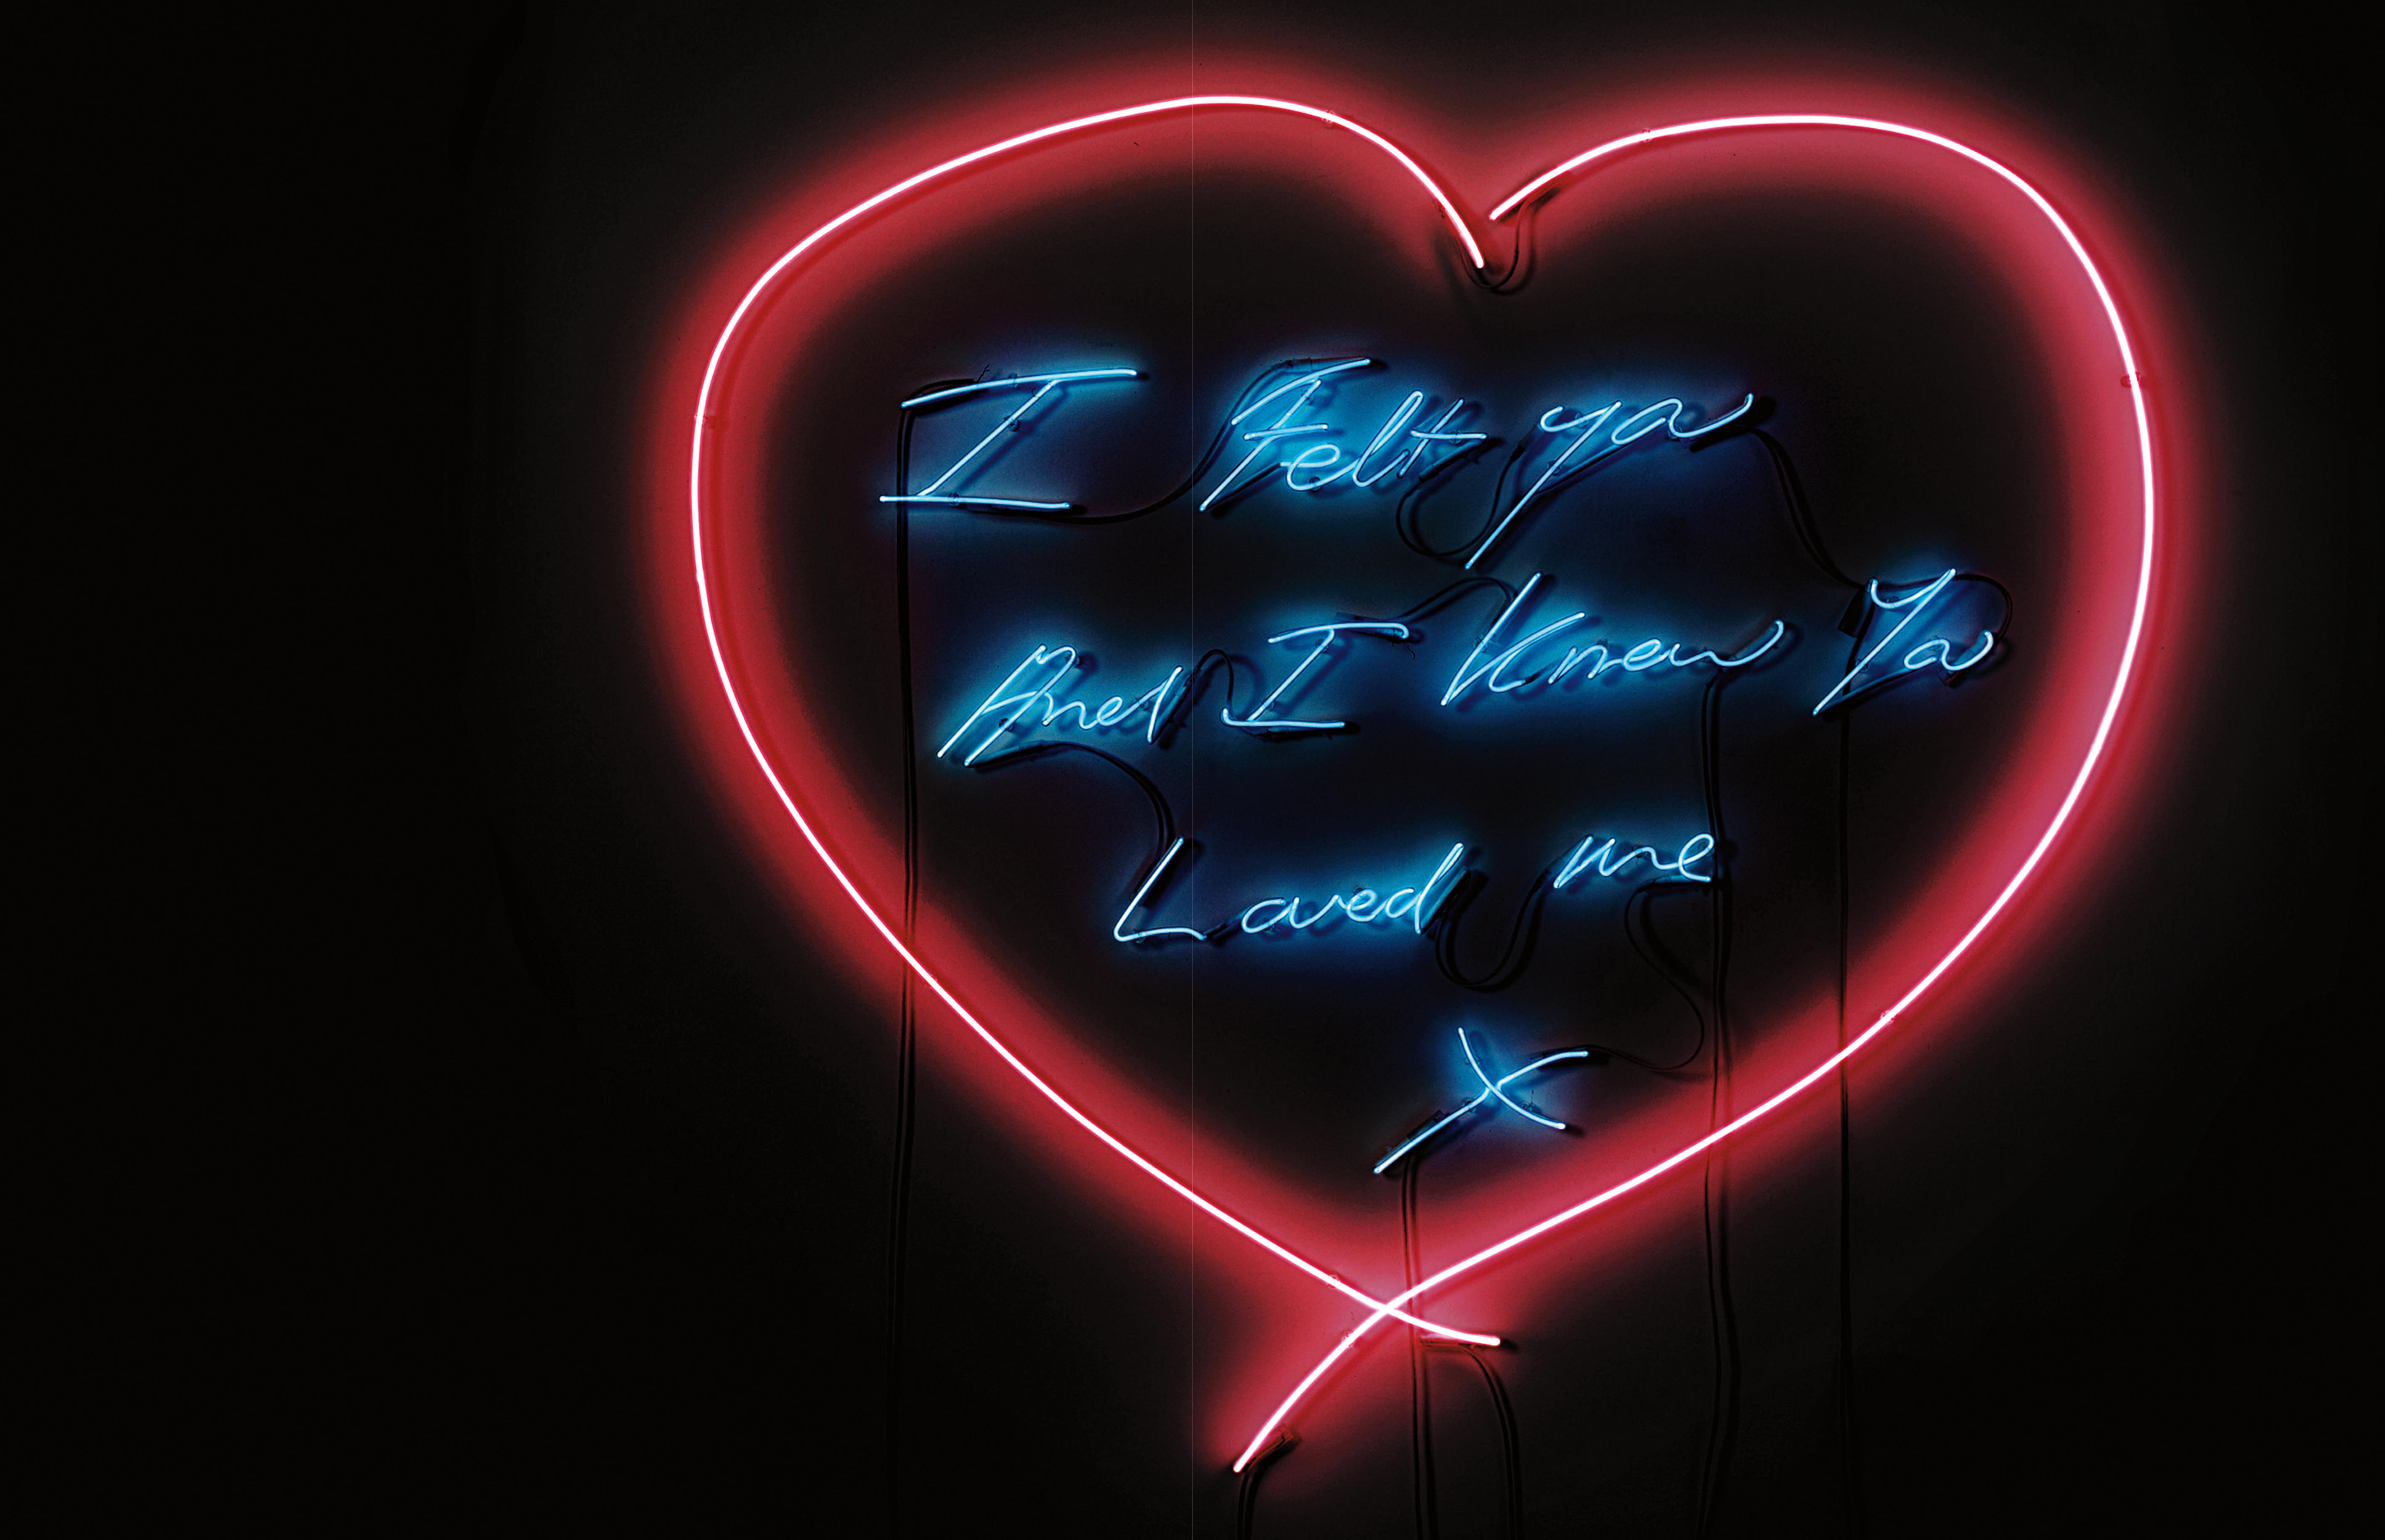 Tracey Emins Neon Signs The Obscenity And Heartache